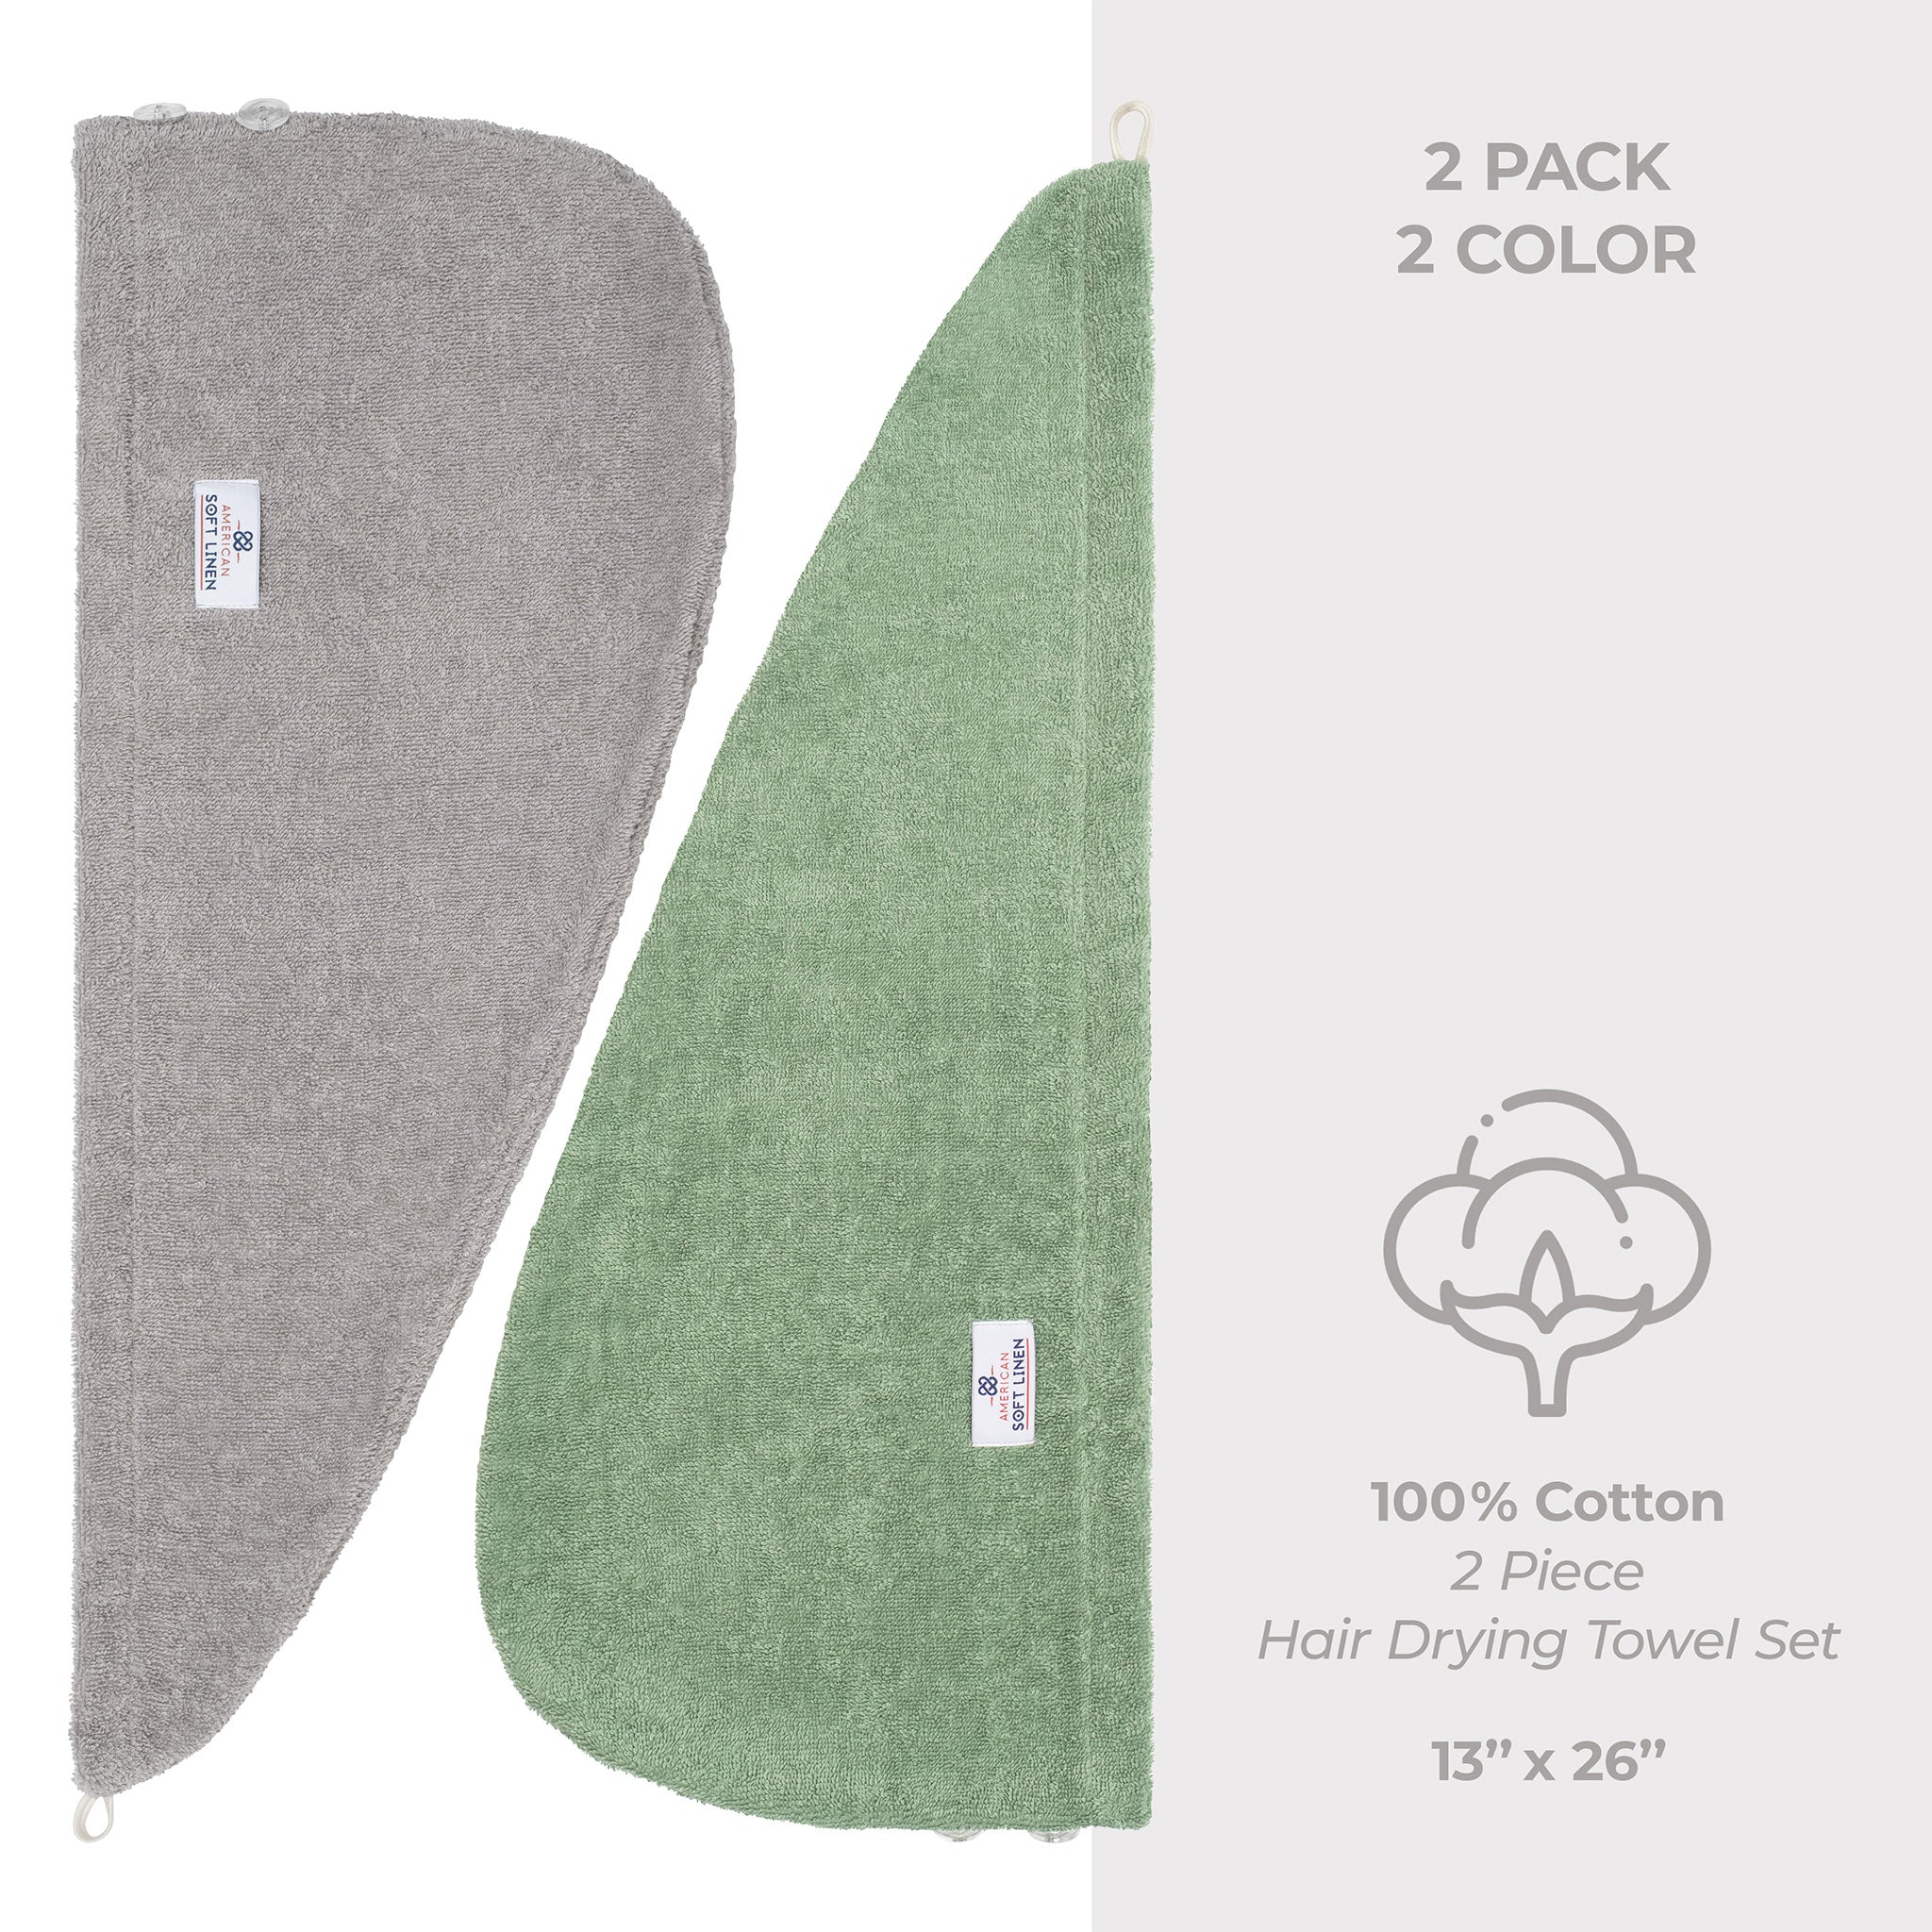 American Soft Linen 100% Cotton Hair Drying Towels for Women 2 pack 75 set case pack rockridge-sage green-5